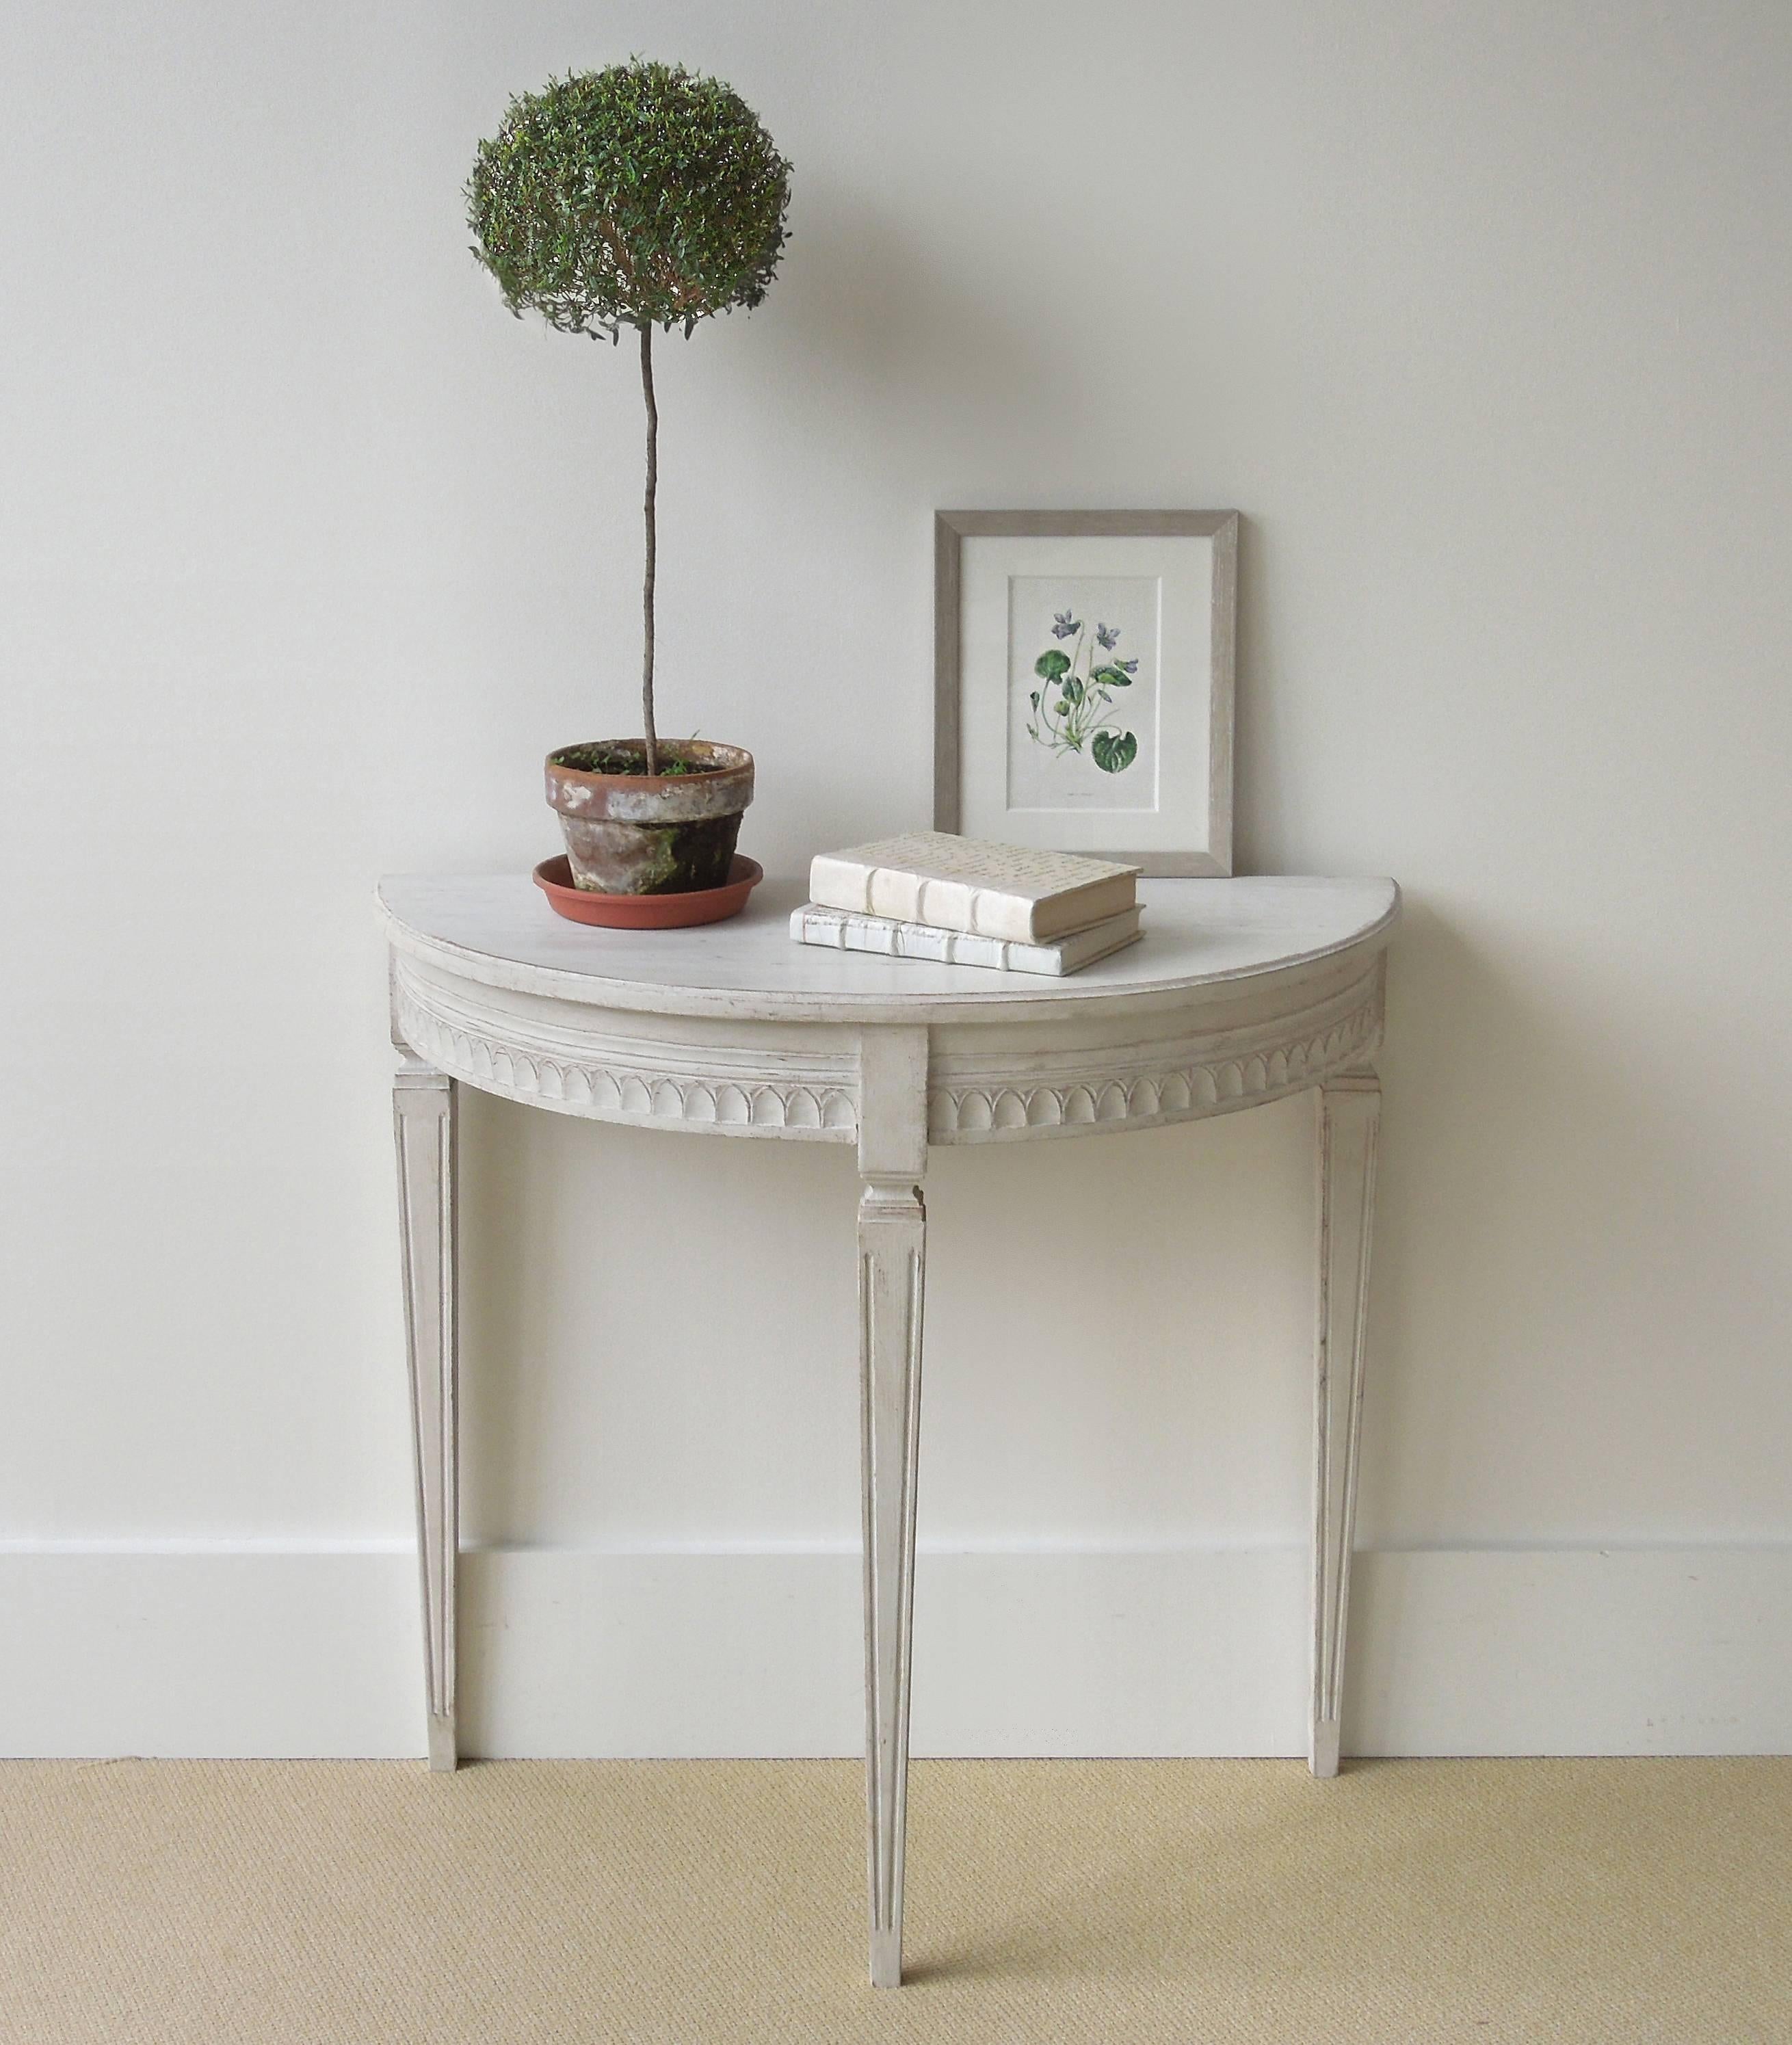 A hard to find pair of small Swedish painted demilune console tables with molded edge, leaf-tip carved apron, and tapered straight legs with fluting. Very elegant form. Hard to find in this small size.